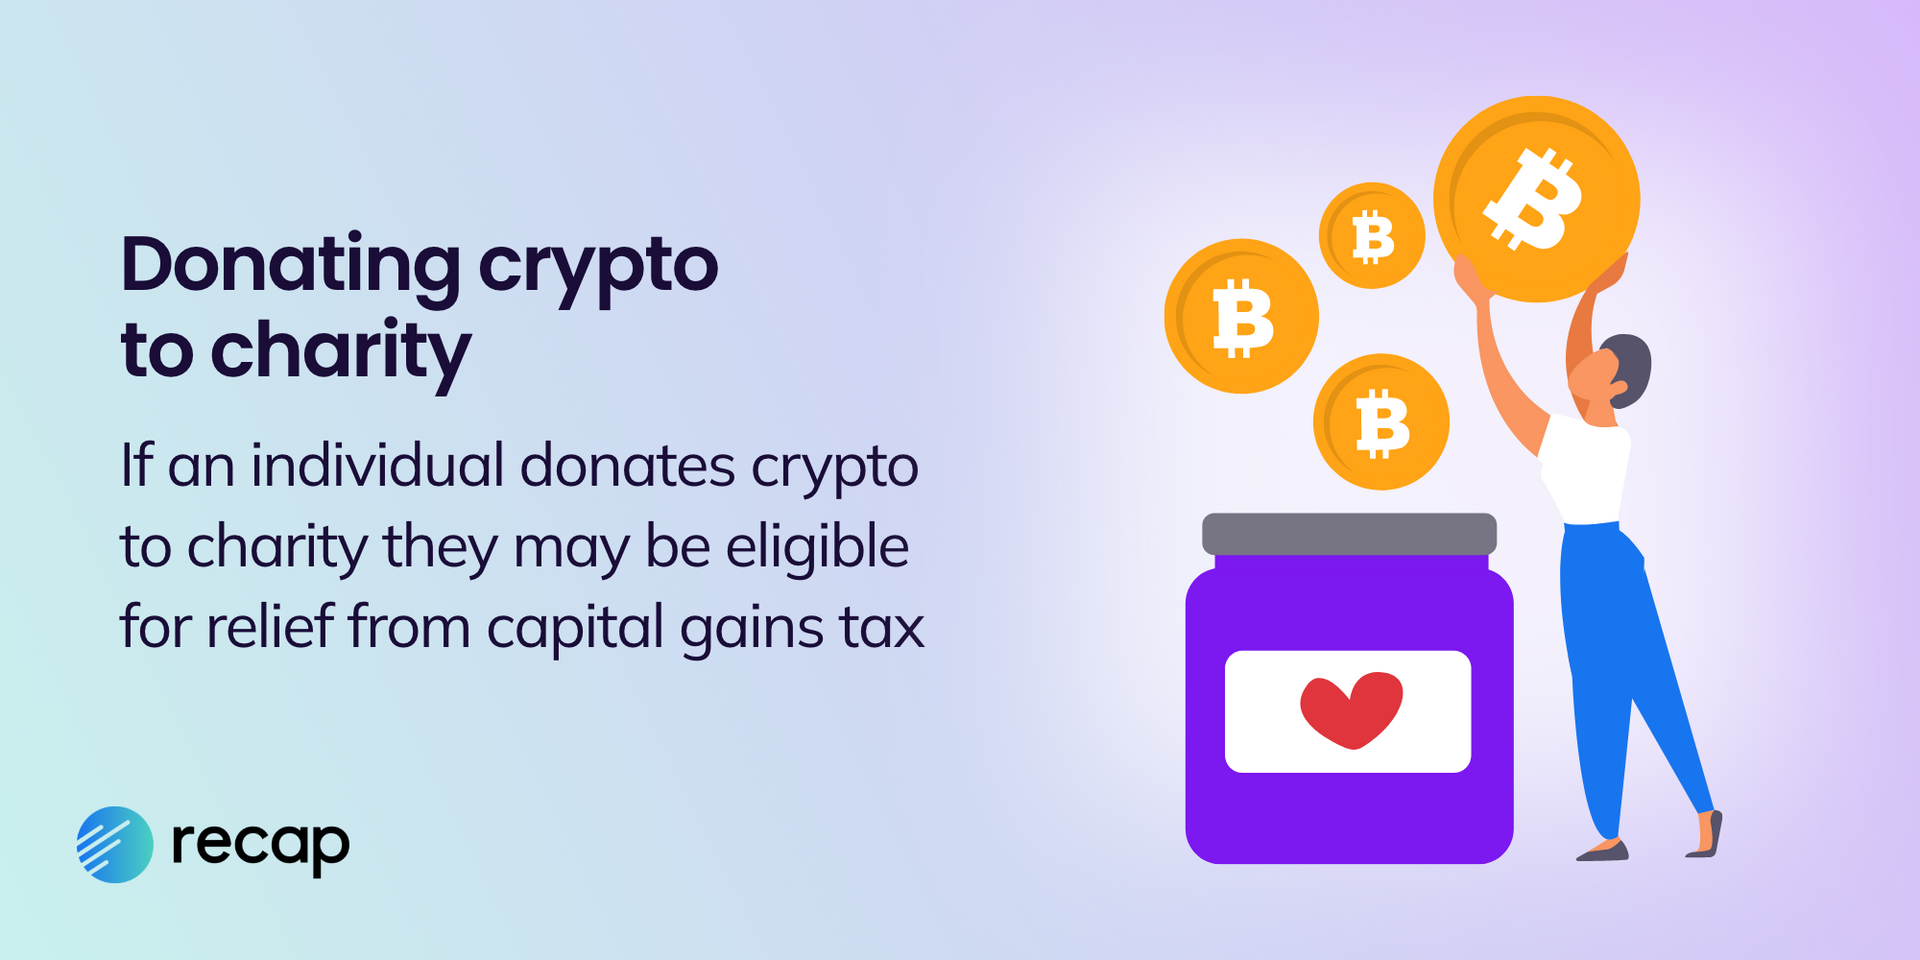 An infographic stating that an individual donating crypto to charity may be eligible for relief from capital gains tax